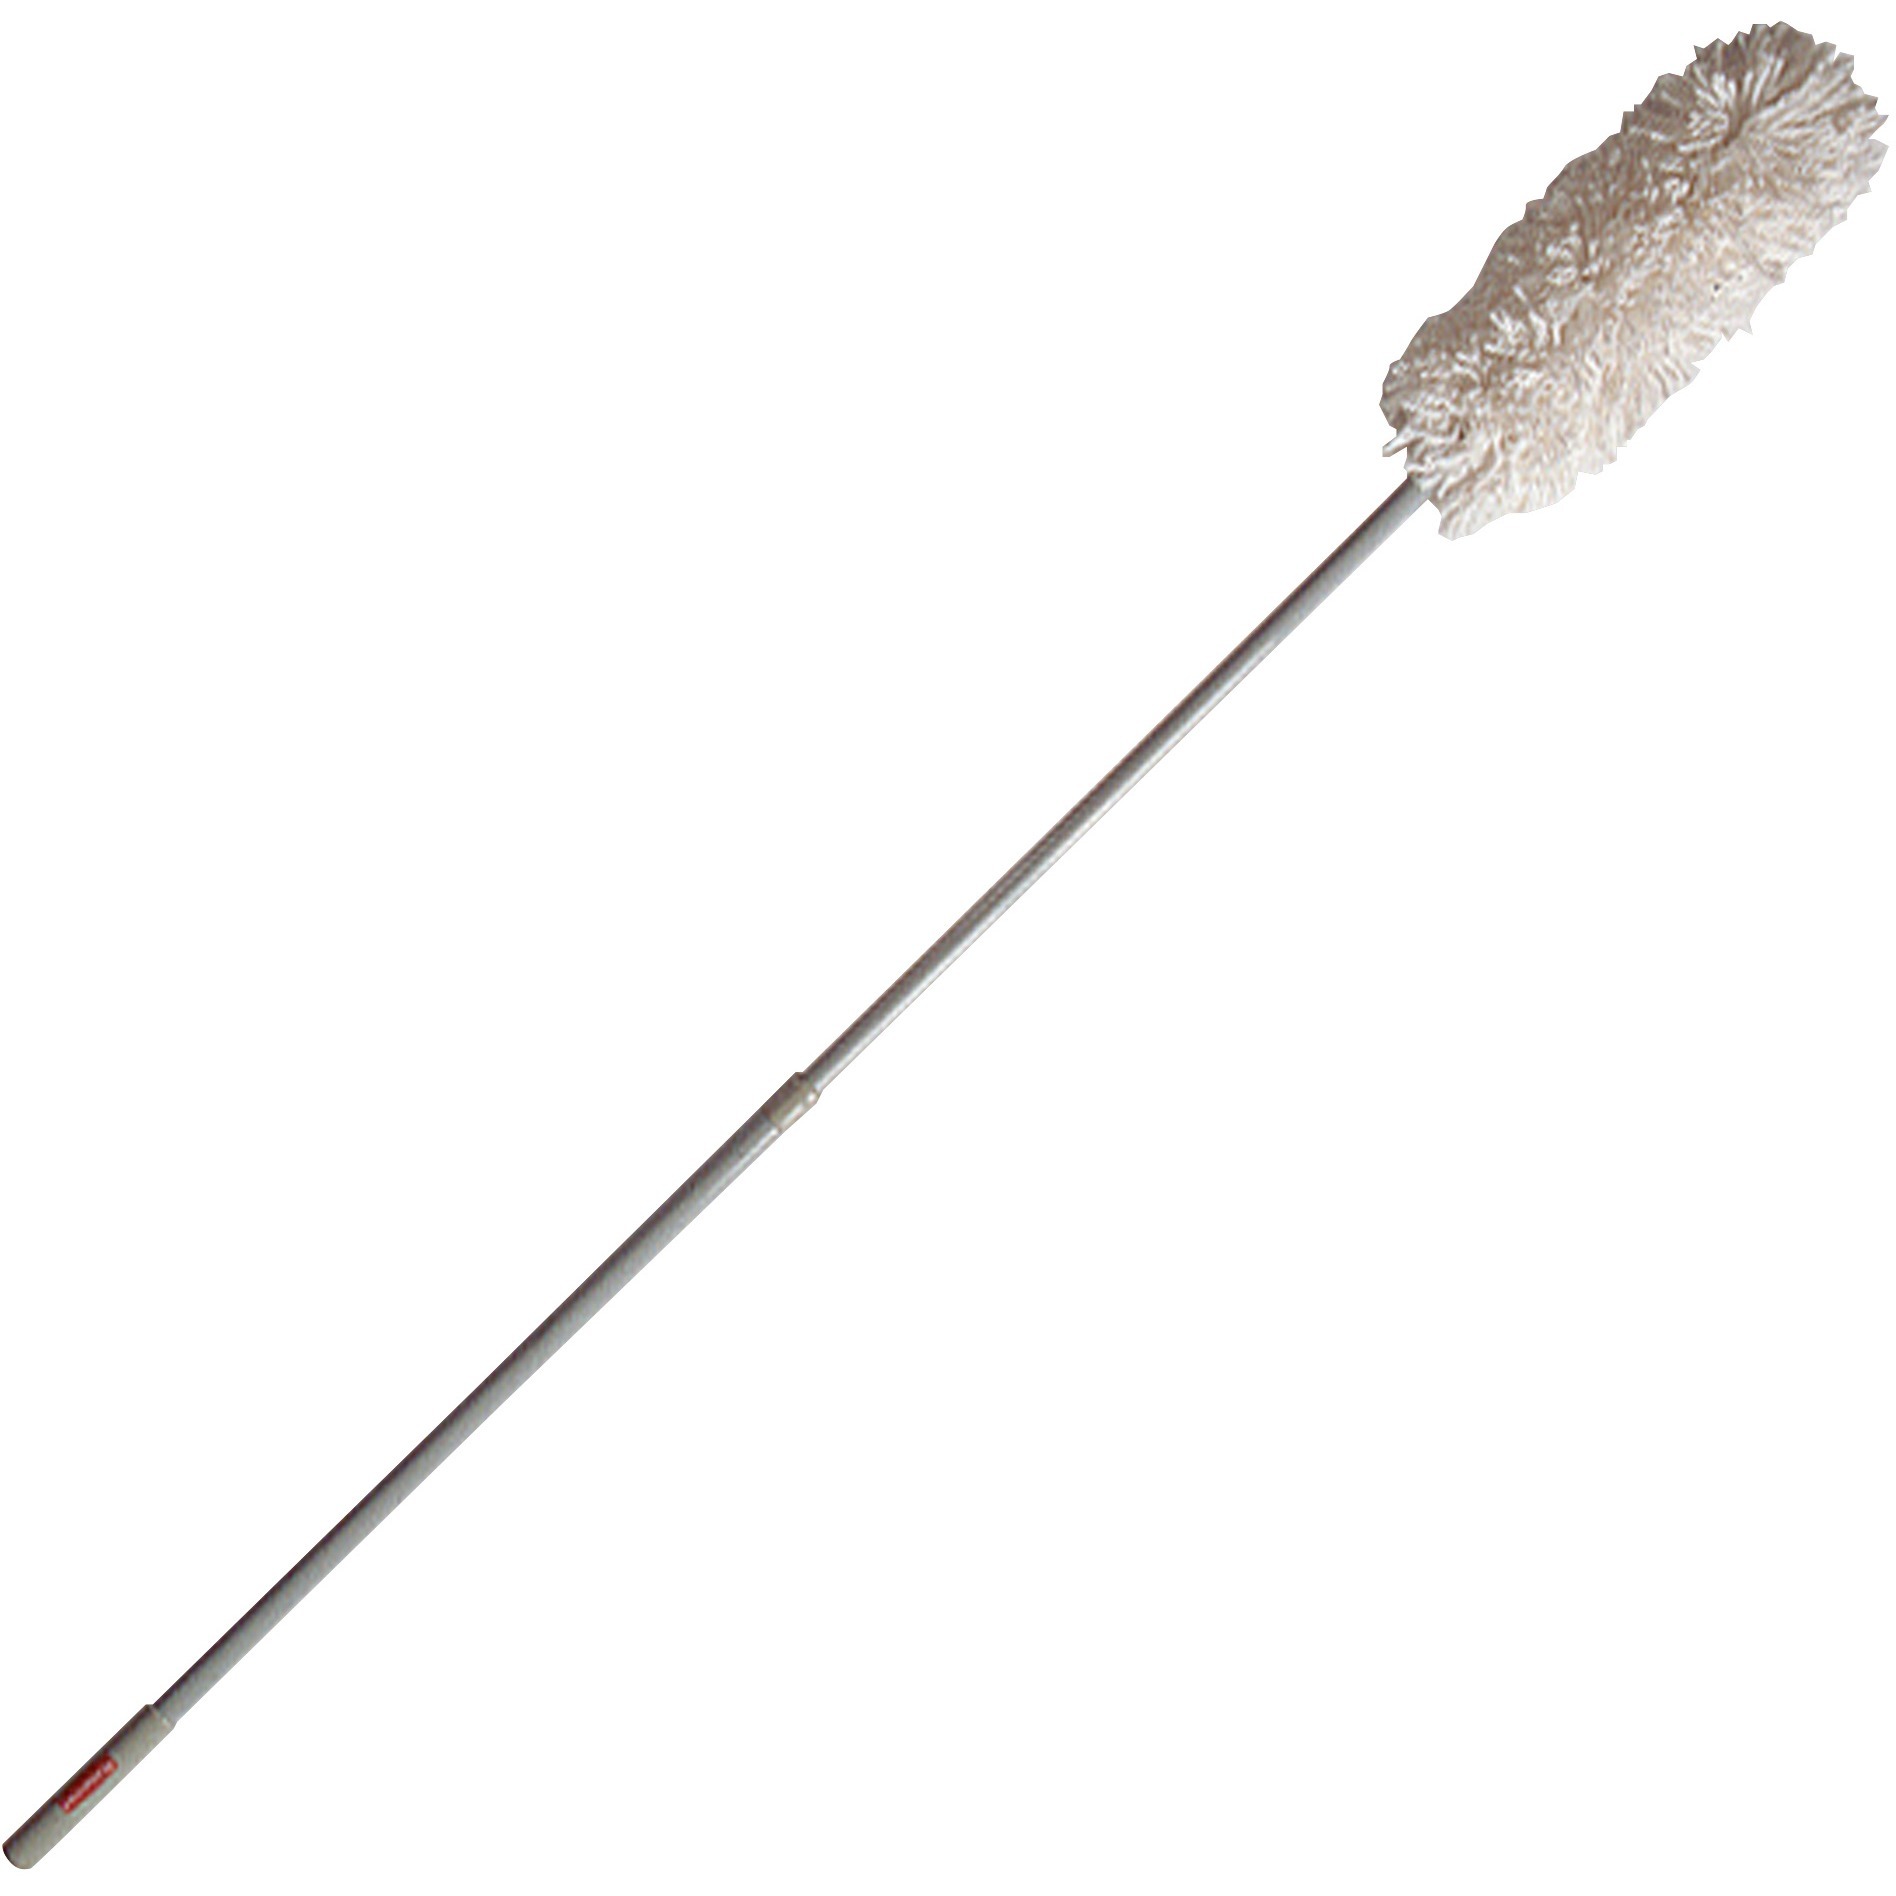 HiDuster Dusting Tool with Straight Lauderable Head, 51" Extension Handle